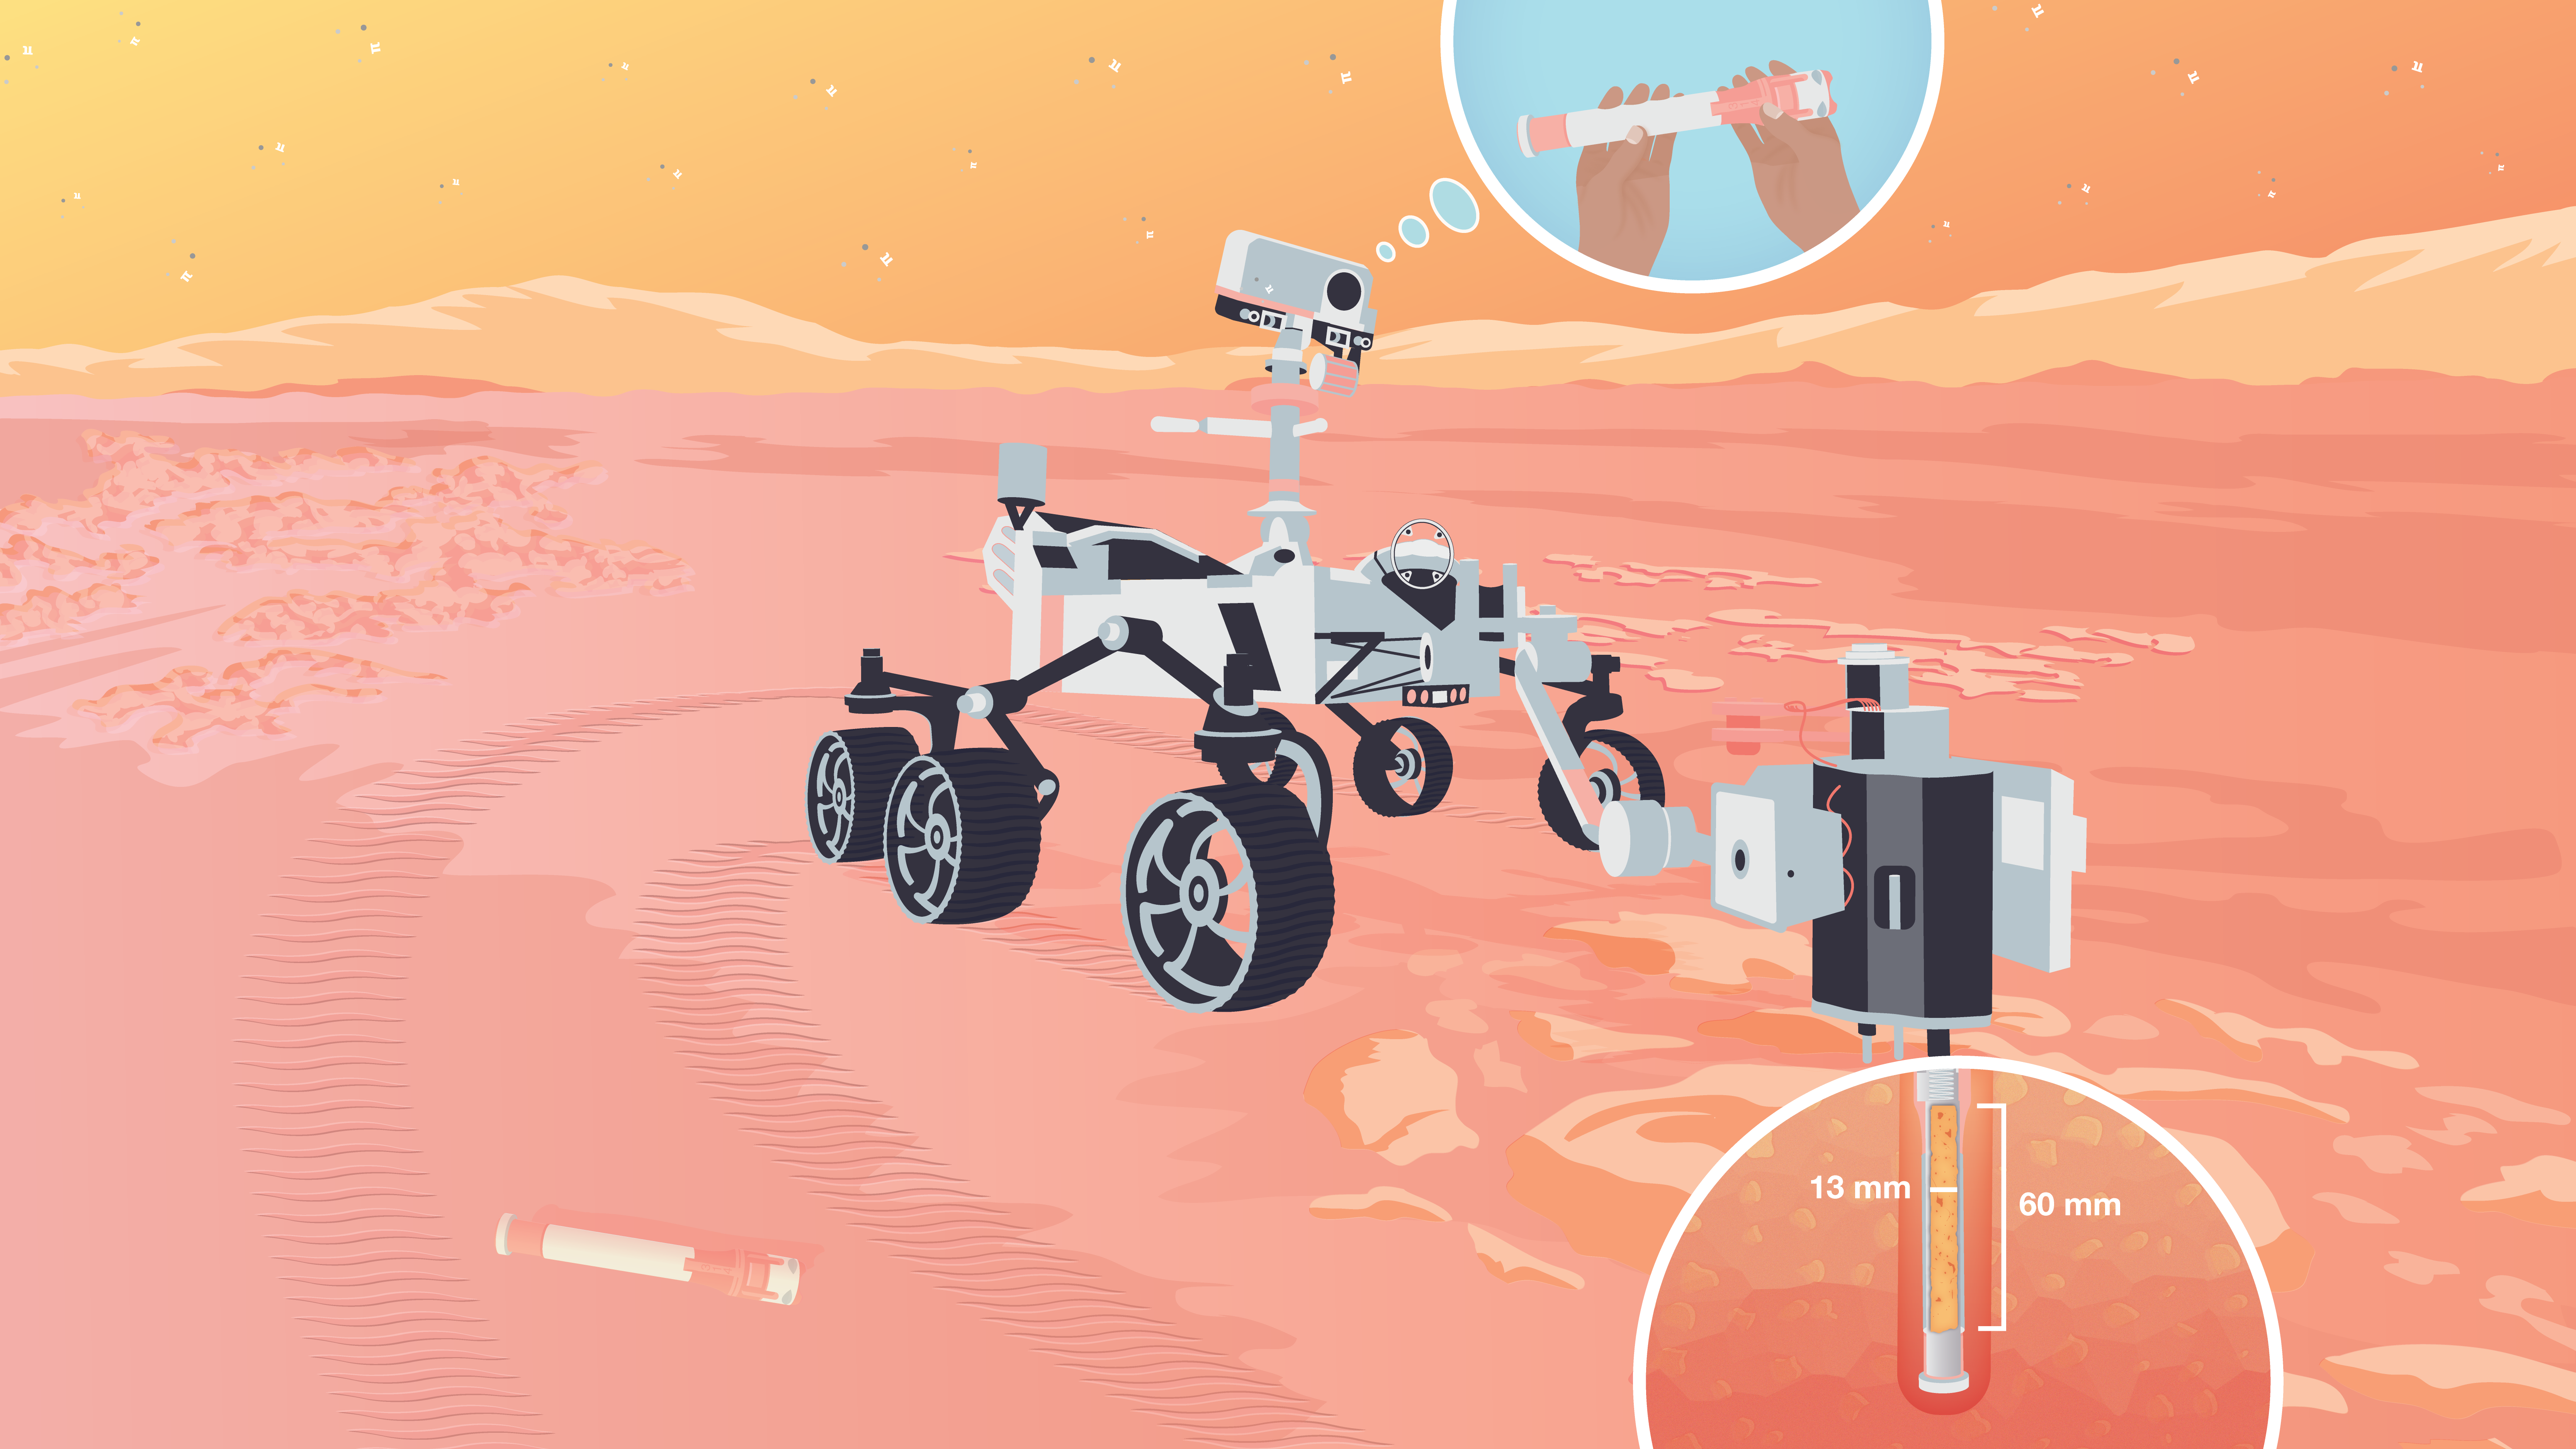 The center of the image shows an illustration of the Perseverance Mars rover with its robotic arm stretched out to the right, touching a rock on the ground. An inset in the lower right shows a cutaway of a coring bit filled with a rock sample measuring 13 mm wide and 60 mm tall. In the lower left a sealed sample tube is shown on the ground next to the rover. A thought bubble showing hands holding a sample tube is coming from the top of the rover's mast. The text of the Tubular Tally problem is shown on the left.